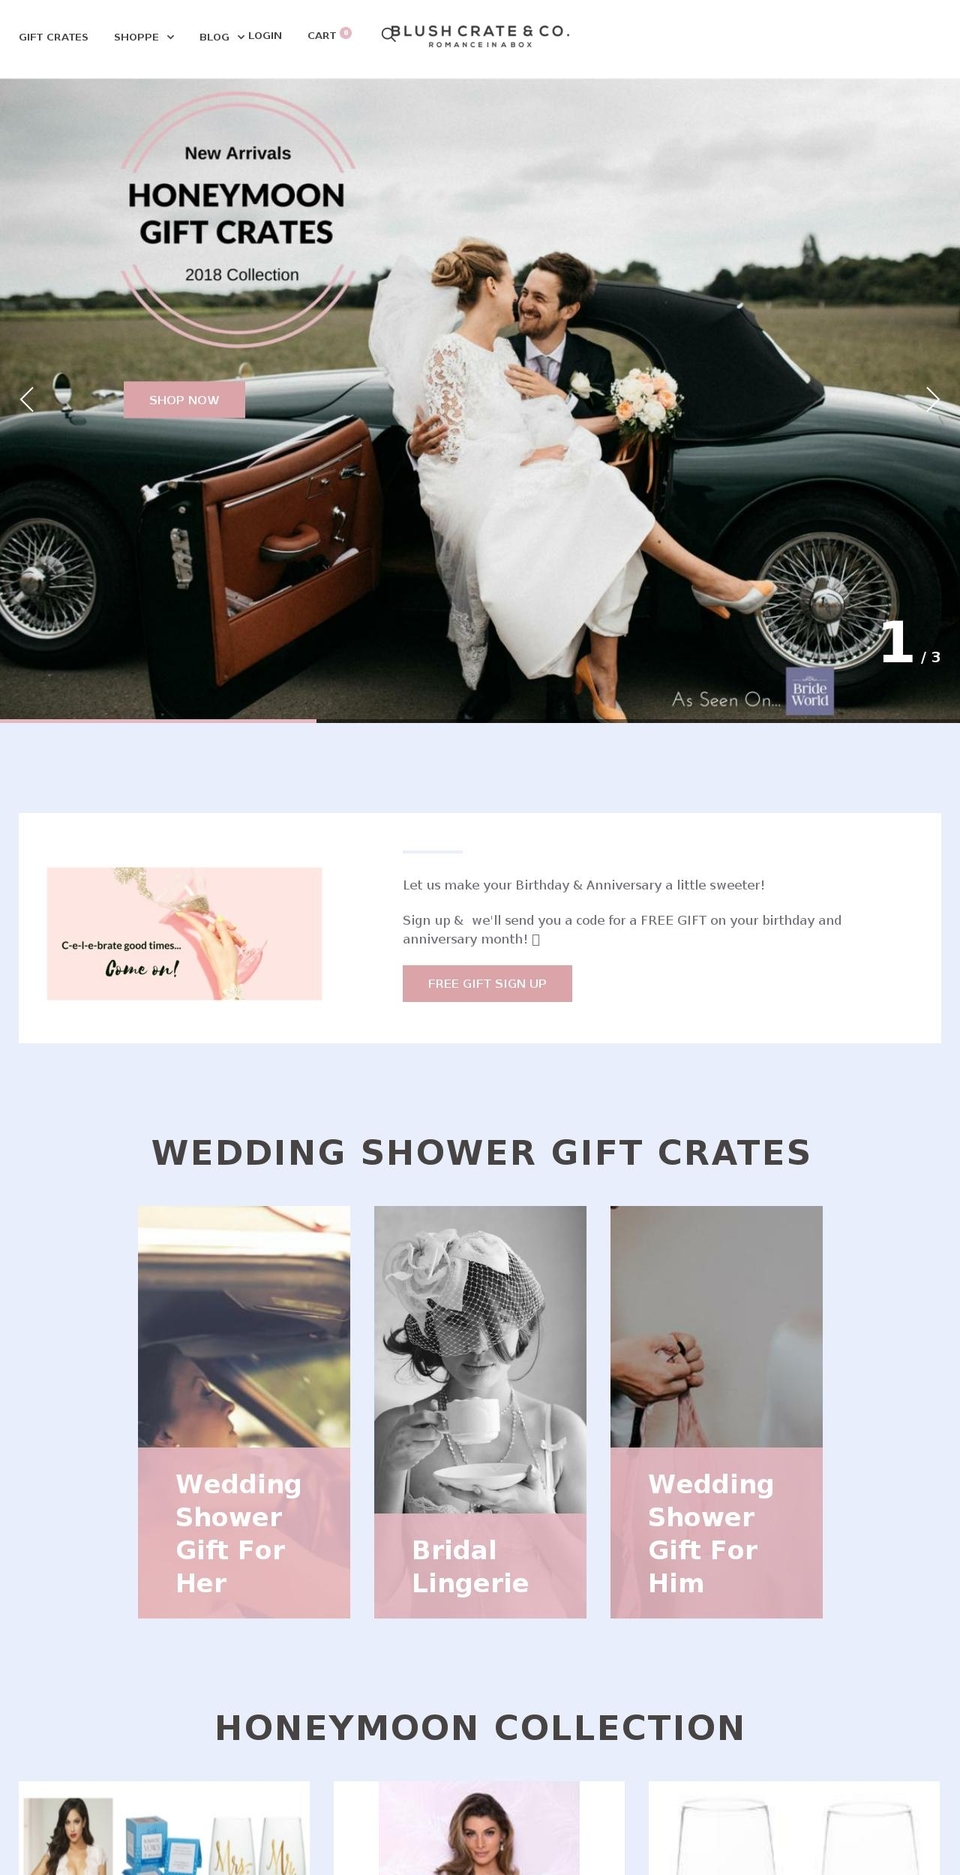 Trademark Shopify theme site example blushcrate.com